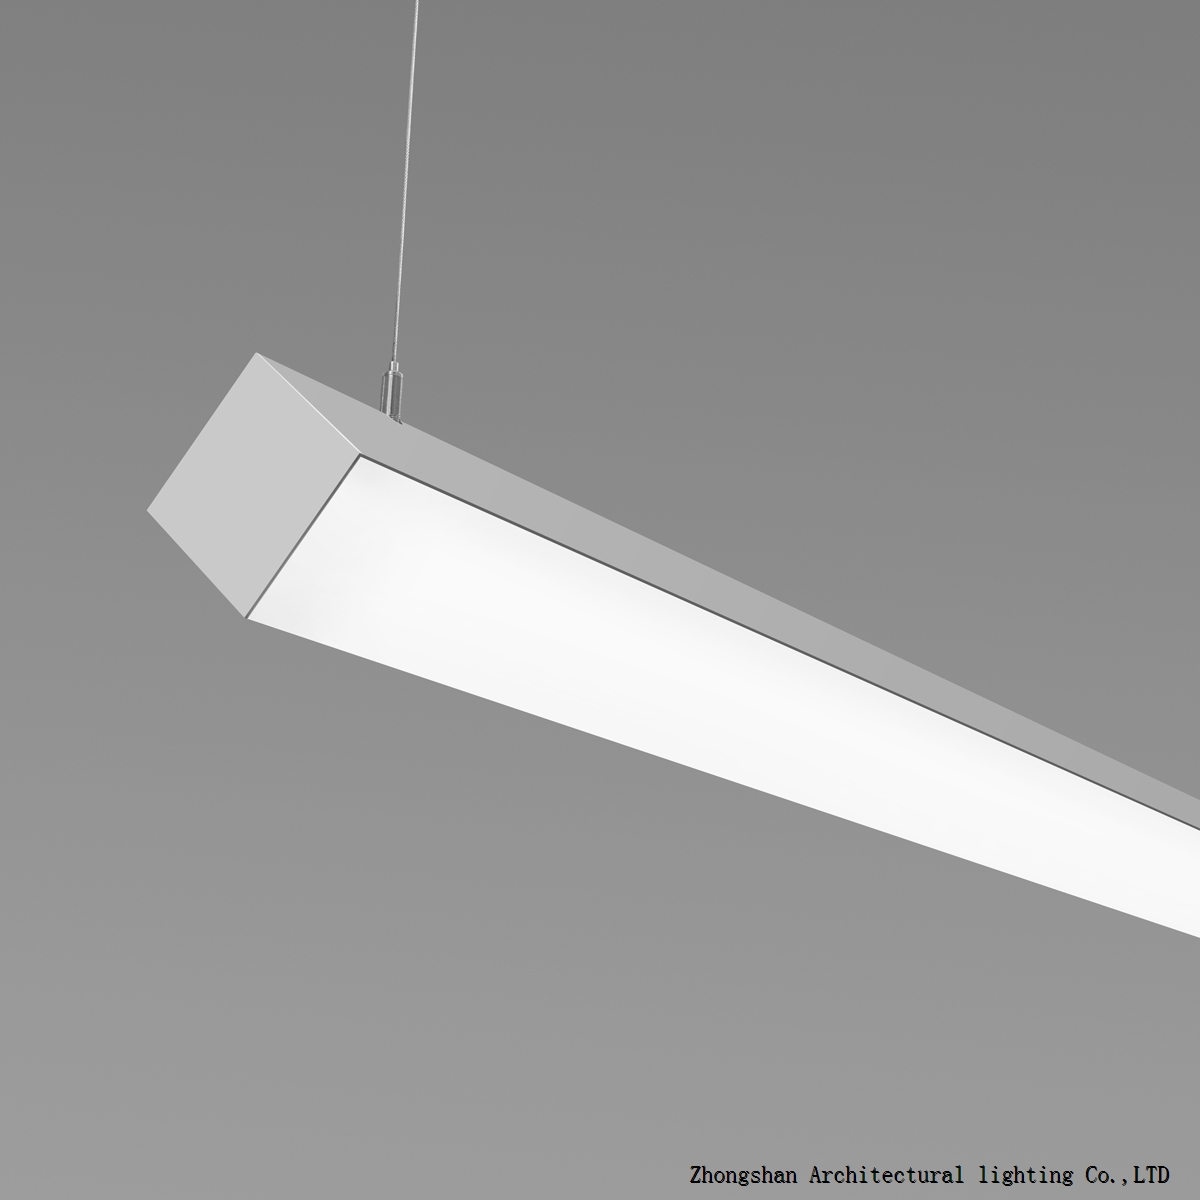 Noventa3.5 suspended,wall mounted fixture